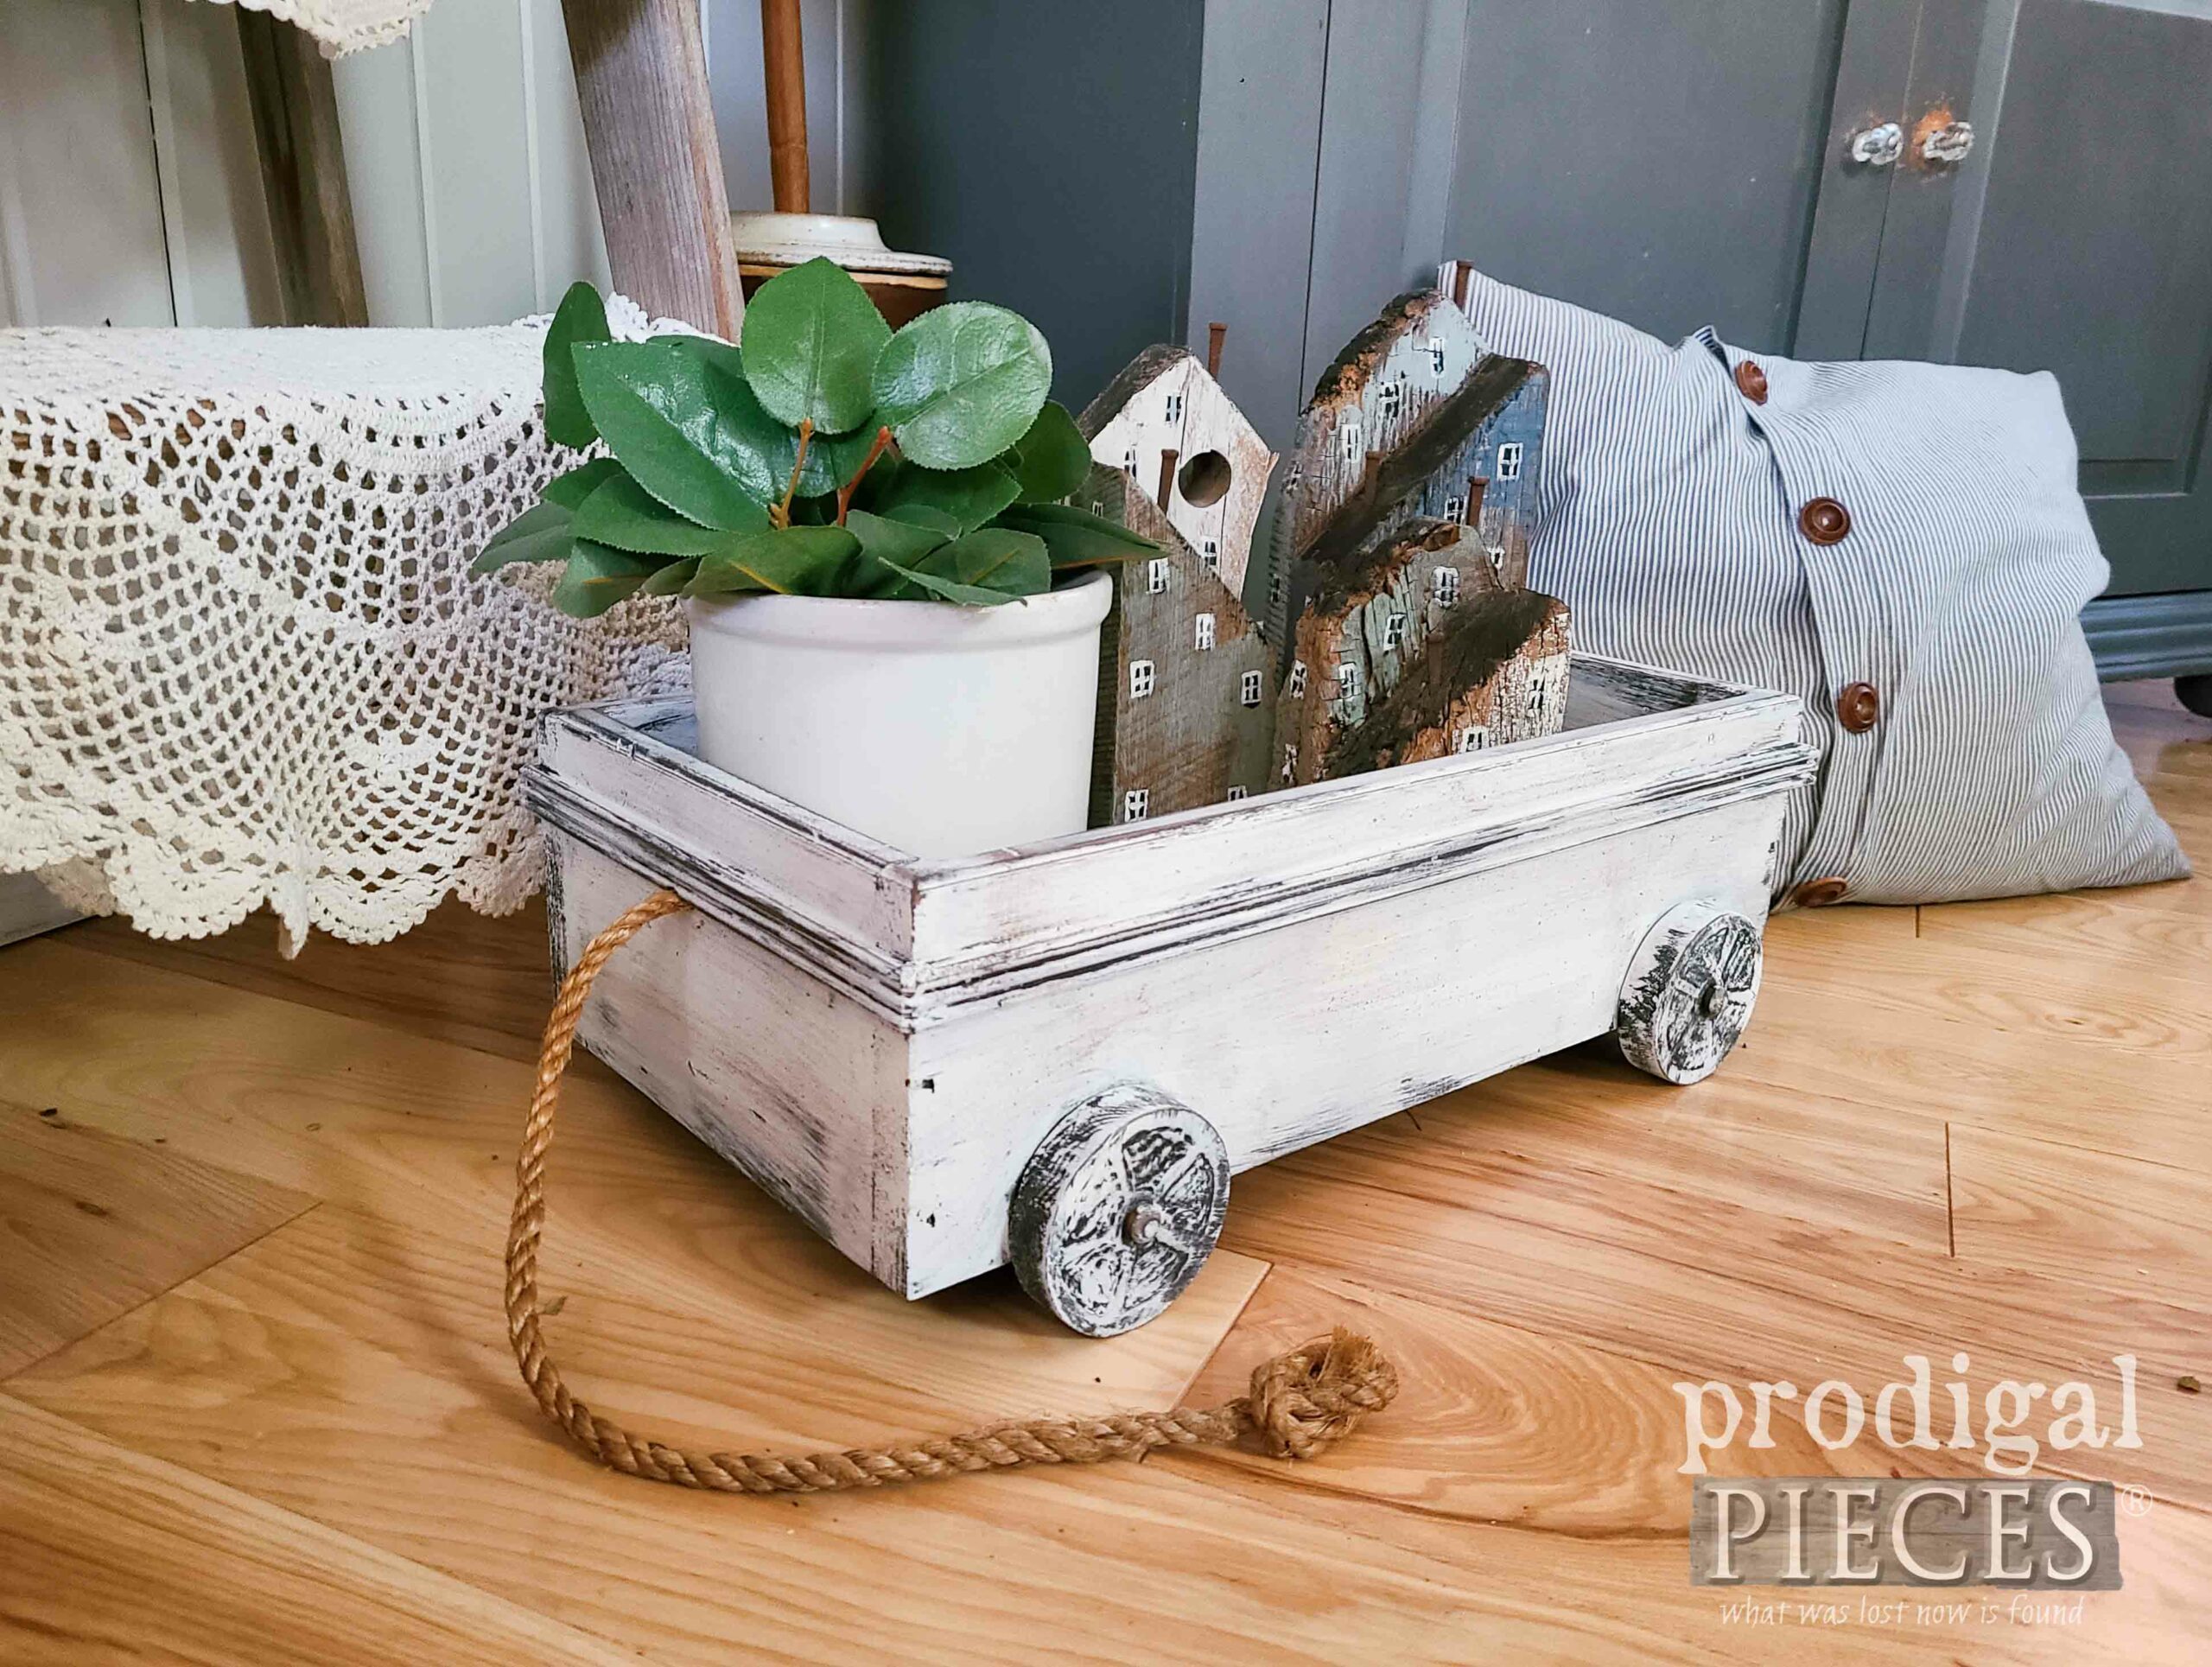 Farmhouse Wooden Wagon in White Milk Paint by Larissa of Prodigal Pieces | prodigalpieces.com #prodigalpieces #milkpaint #reclaimed